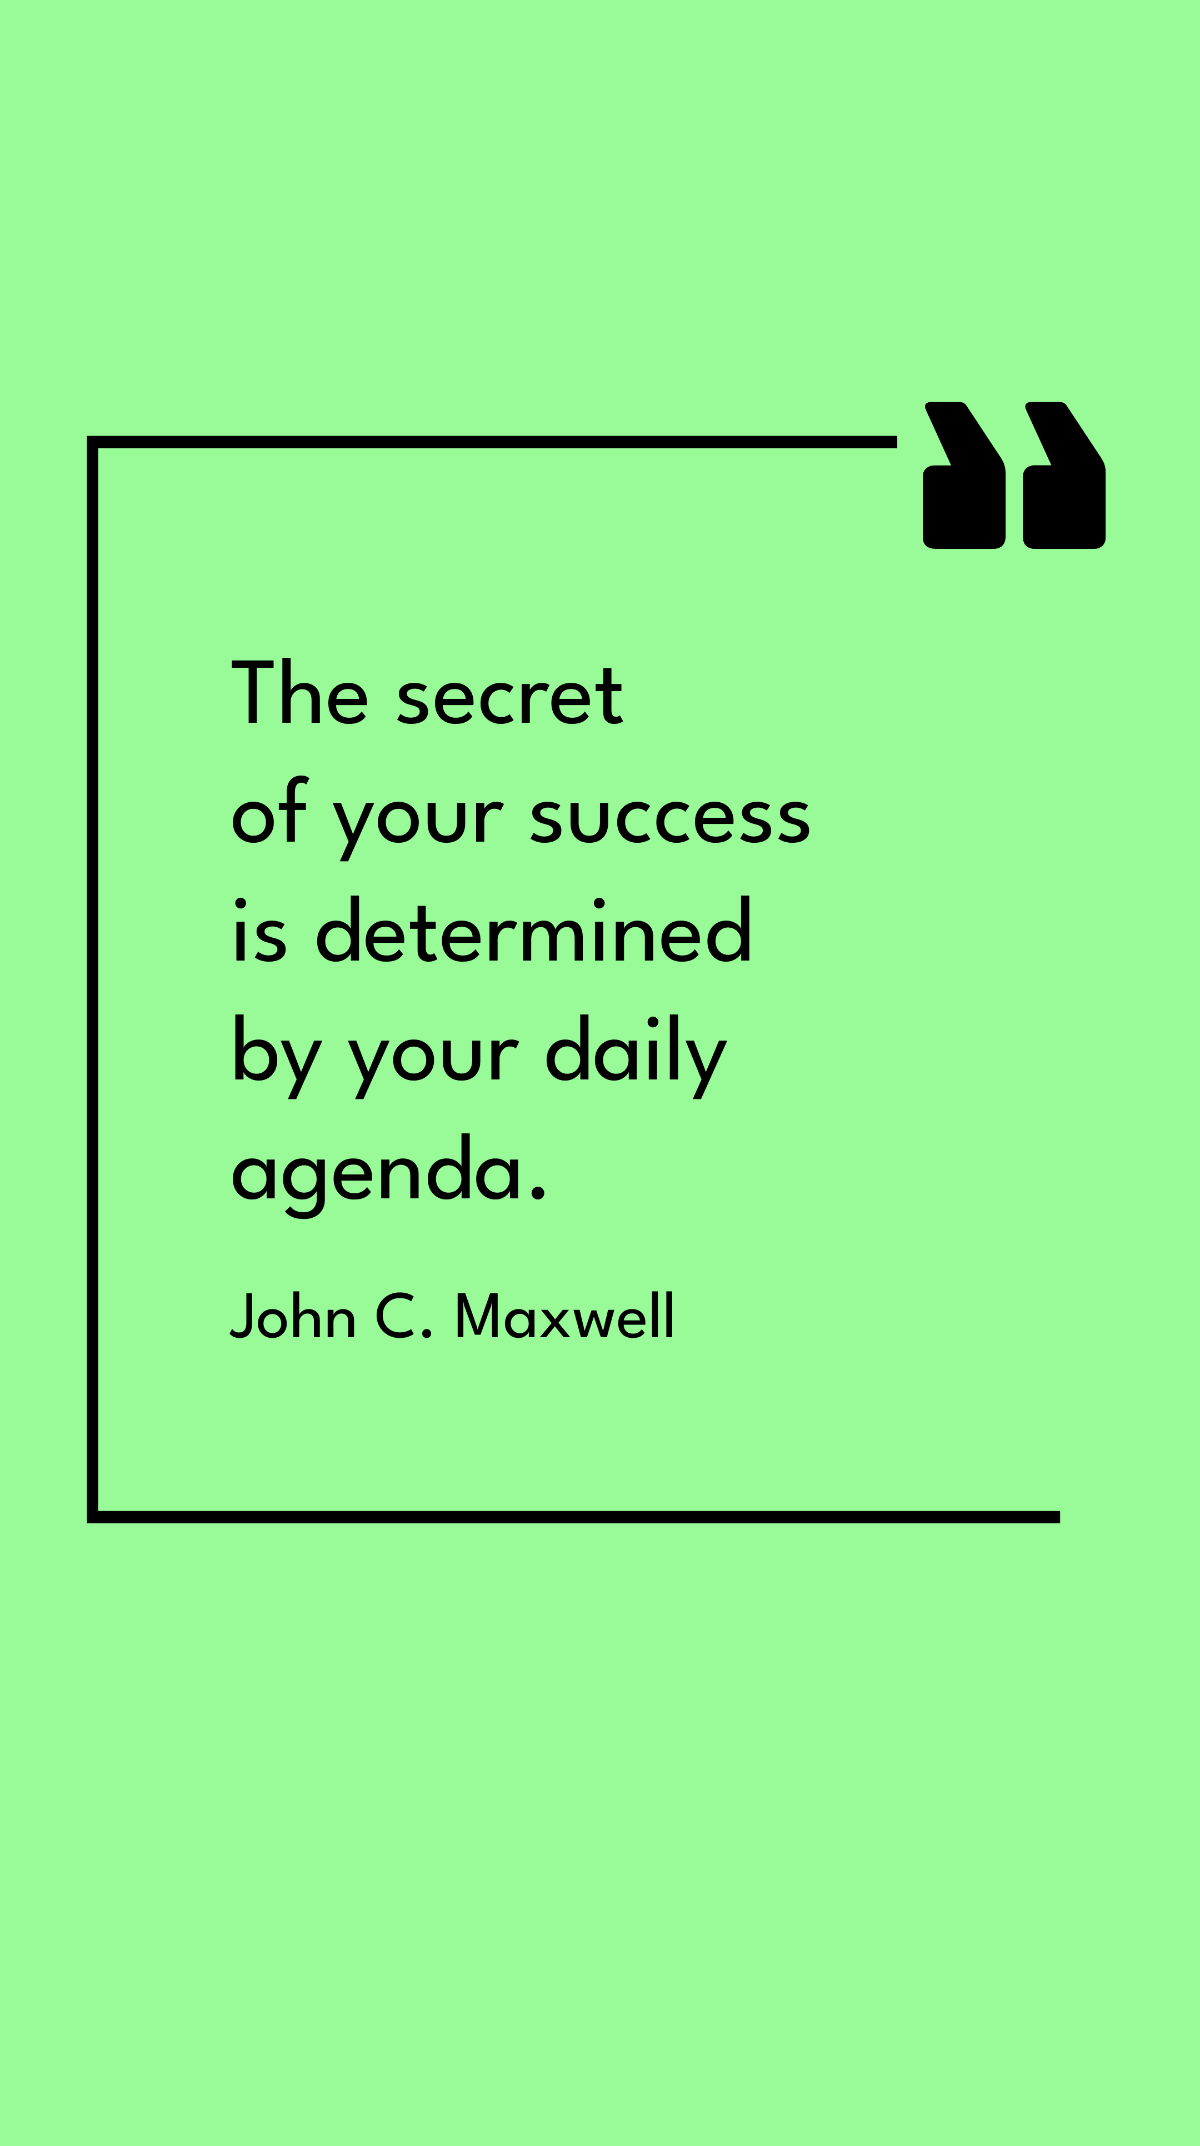 Free John C. Maxwell - The secret of your success is determined by your daily agenda. Template